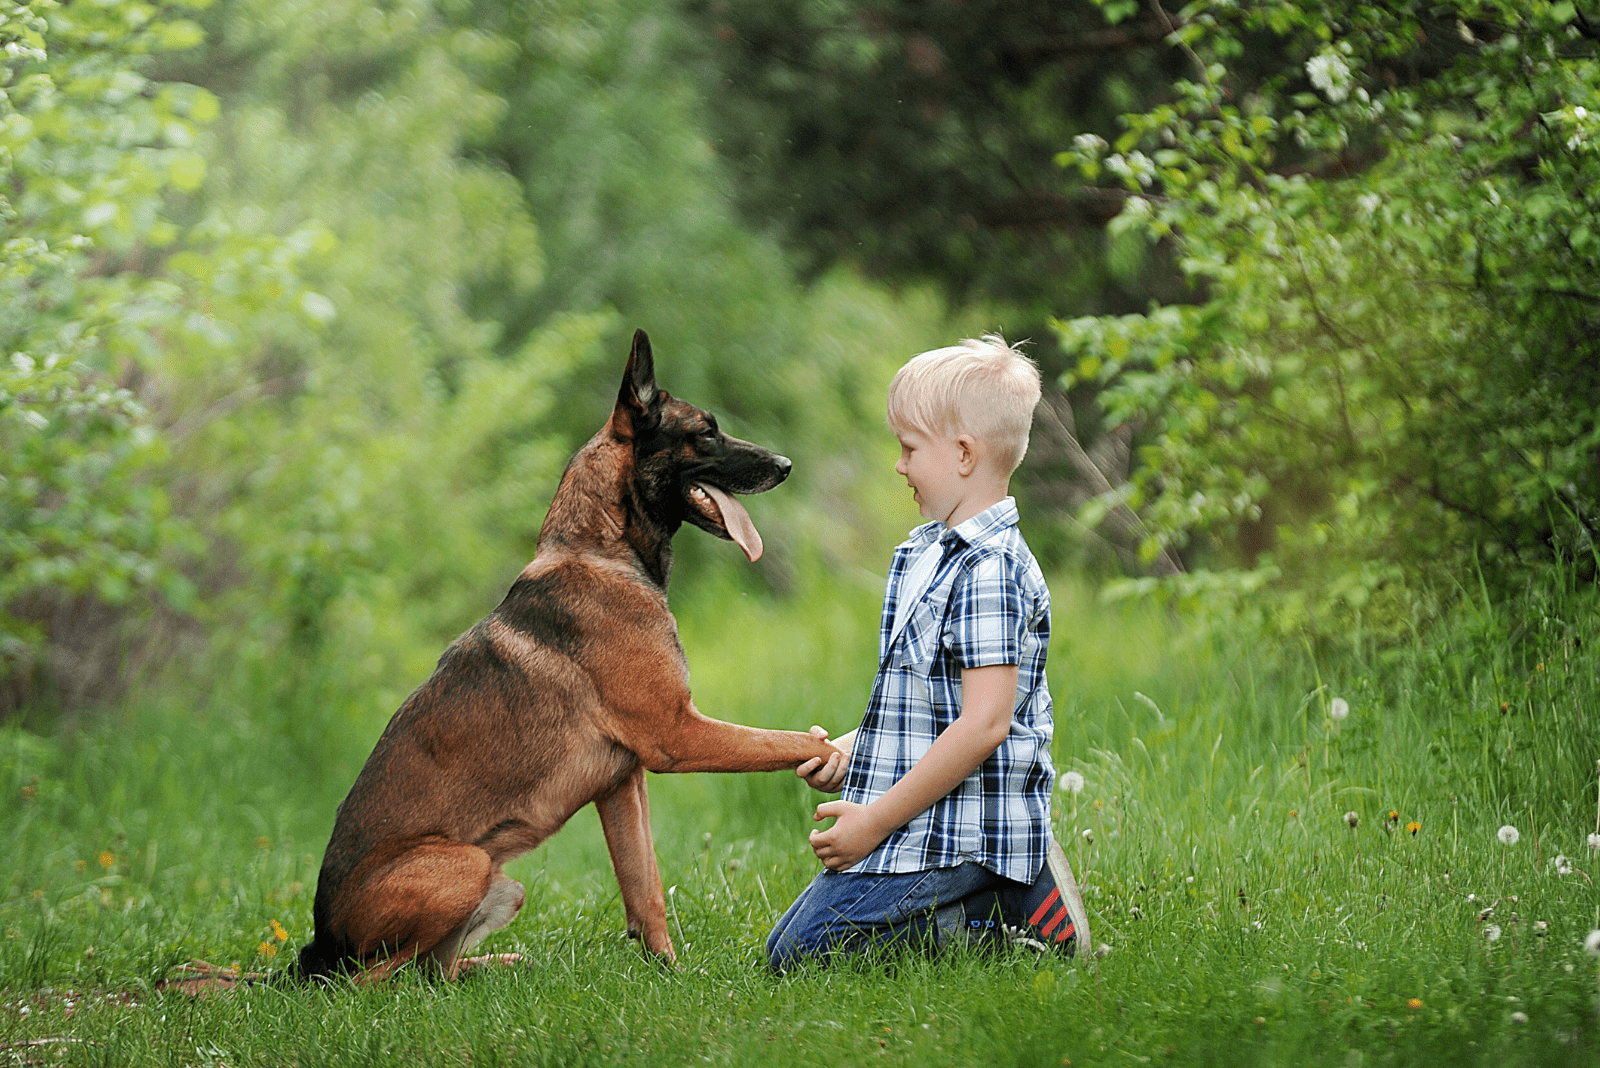 Belgian Malinois is playing with a child